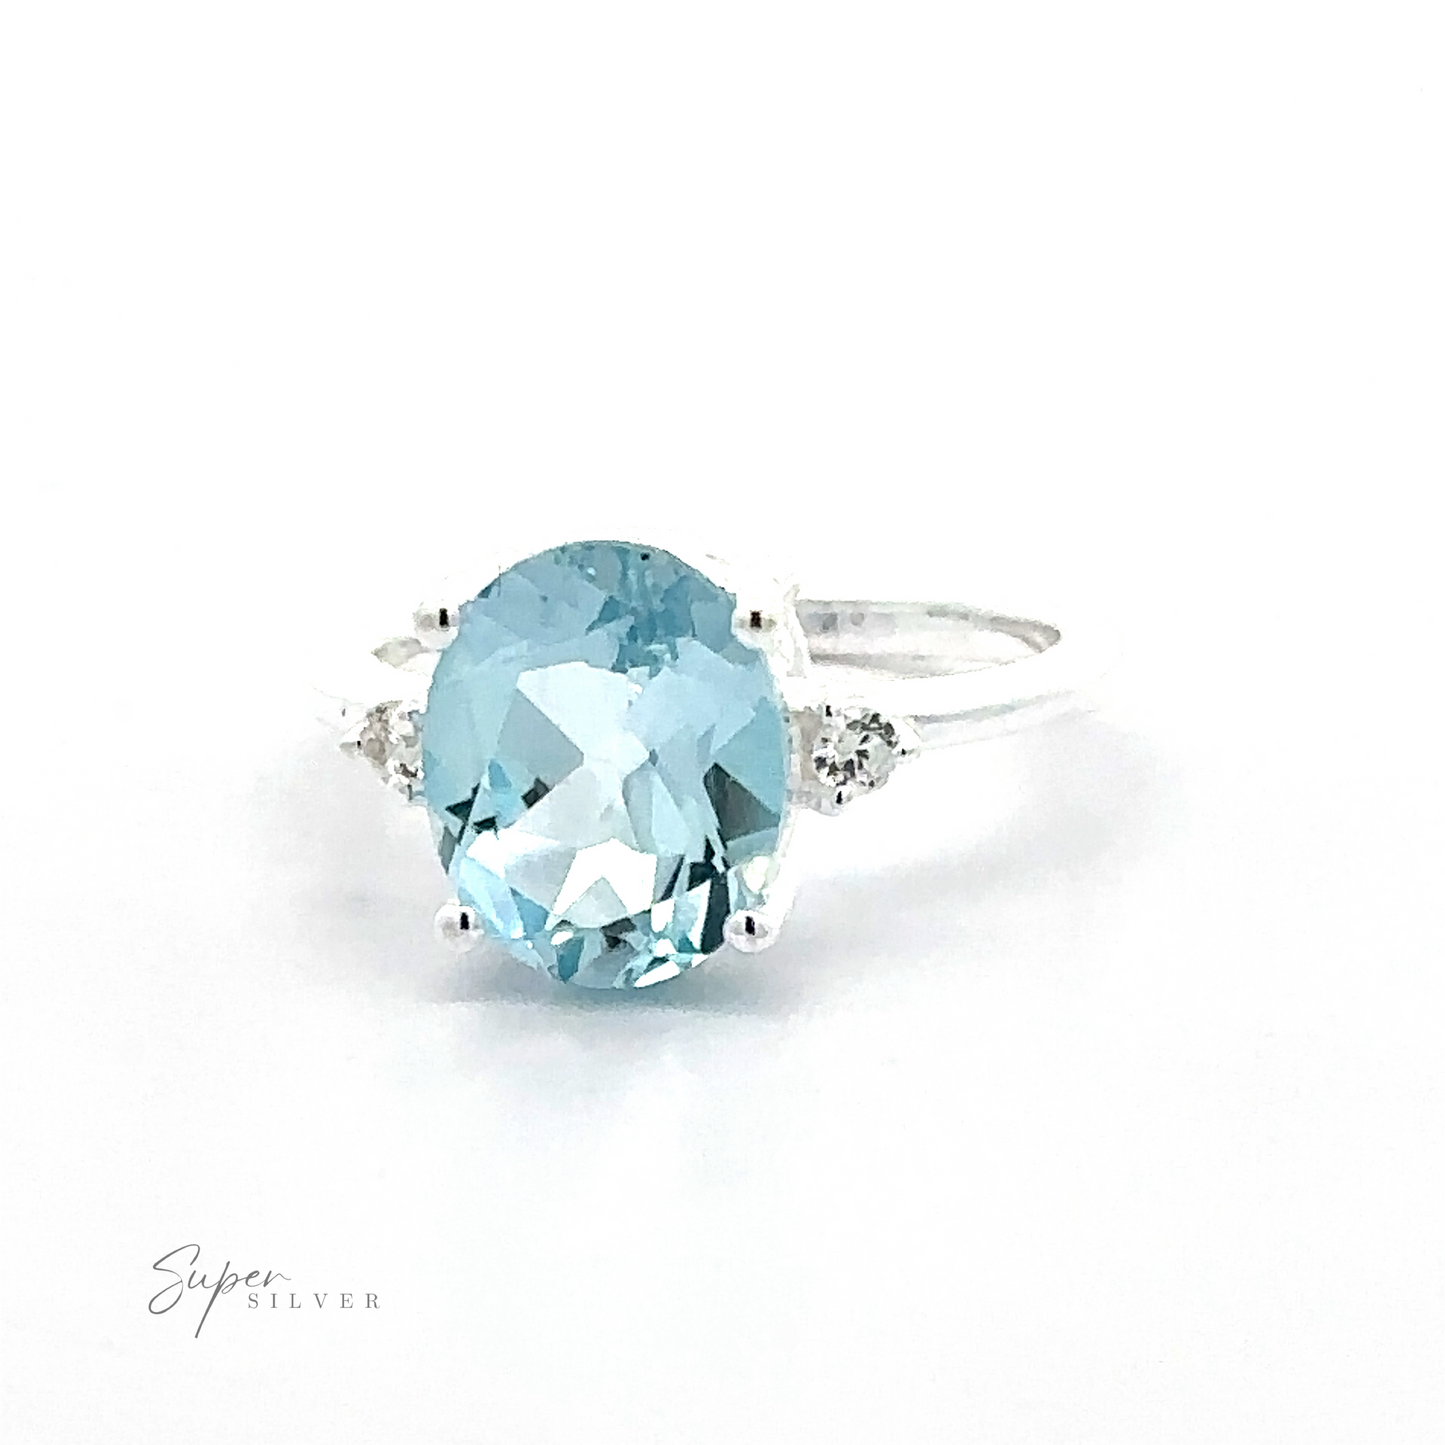 
                  
                    A Brilliant Pronged Oval Gemstone Ring featuring a large oval aquamarine stone in a prong setting, flanked by small diamonds, displayed on a plain white background.
                  
                